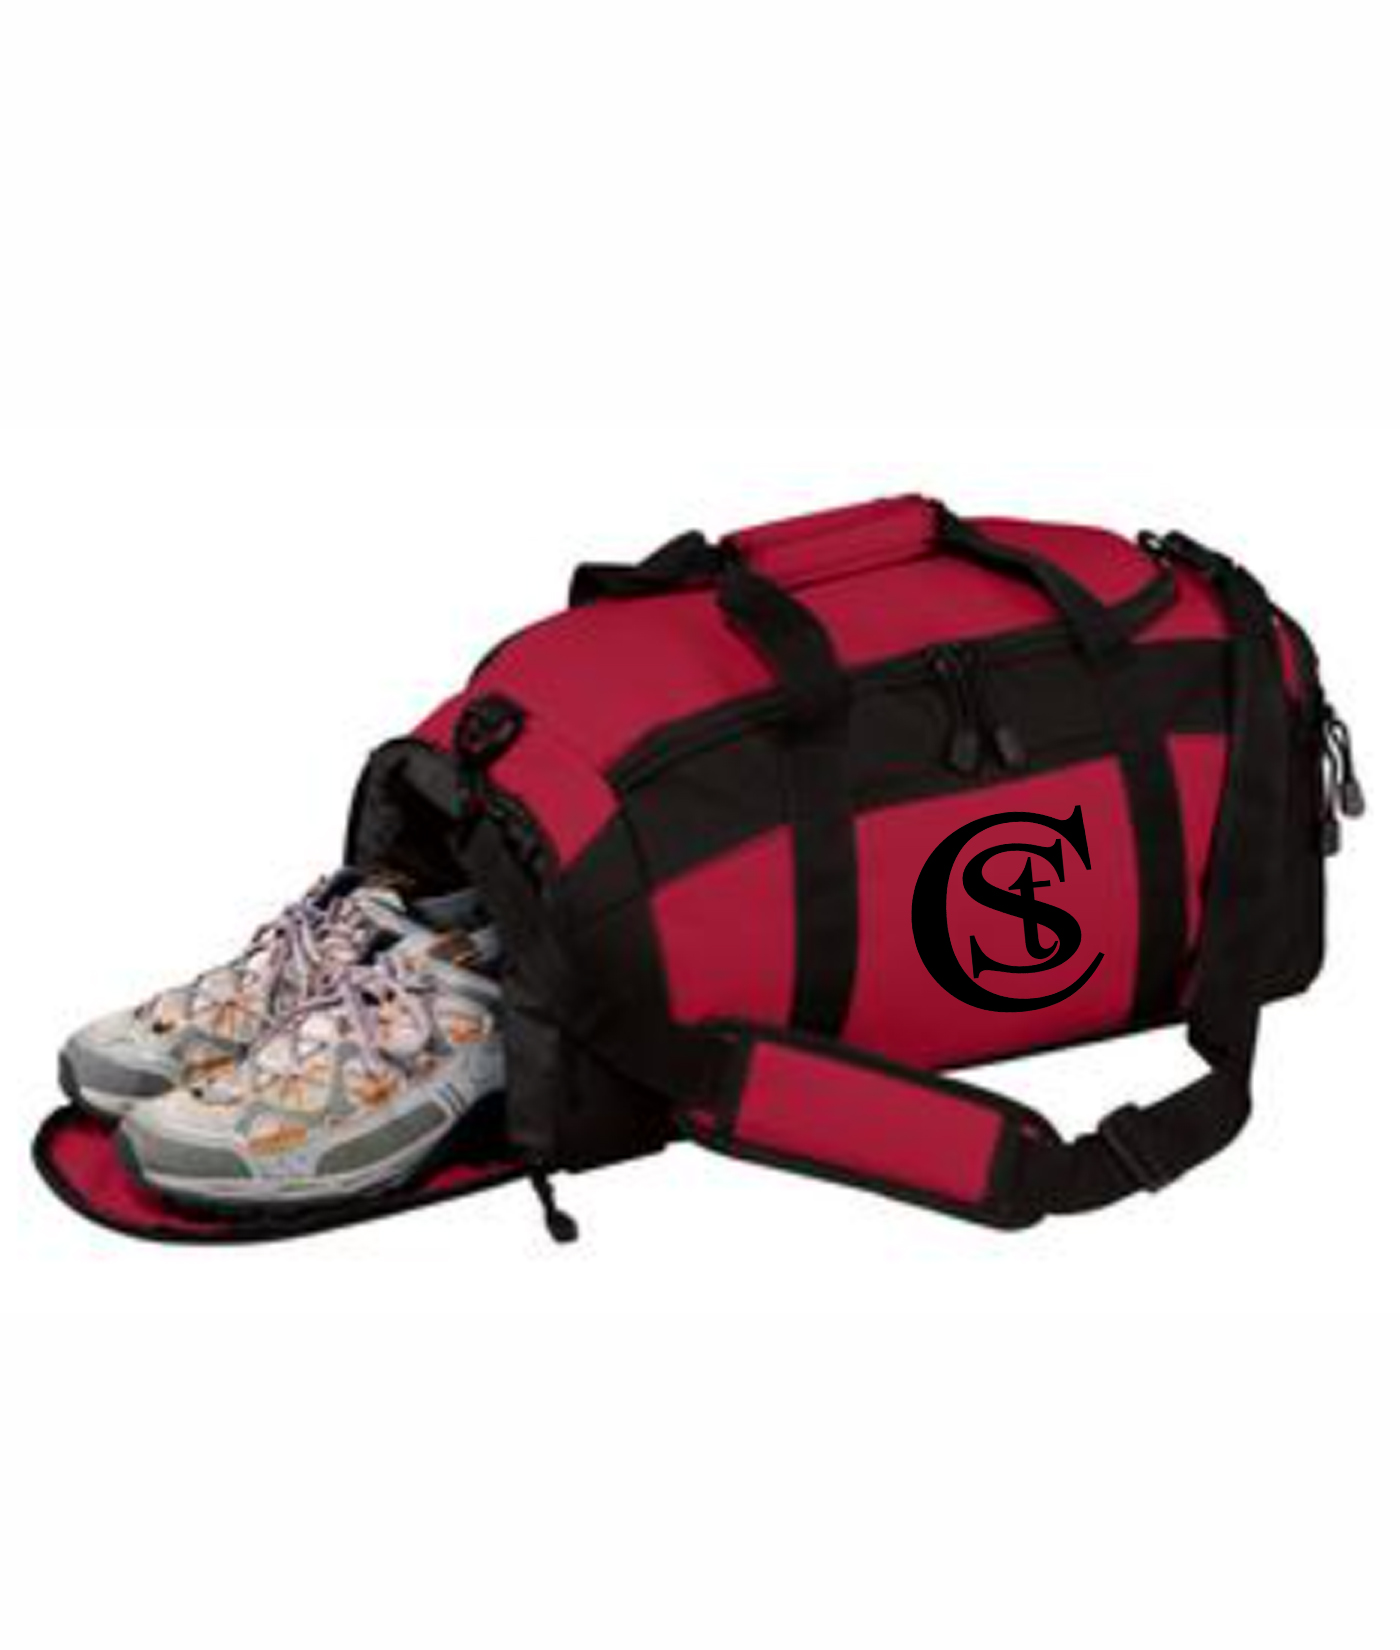 Duffle Bag with STC Logo